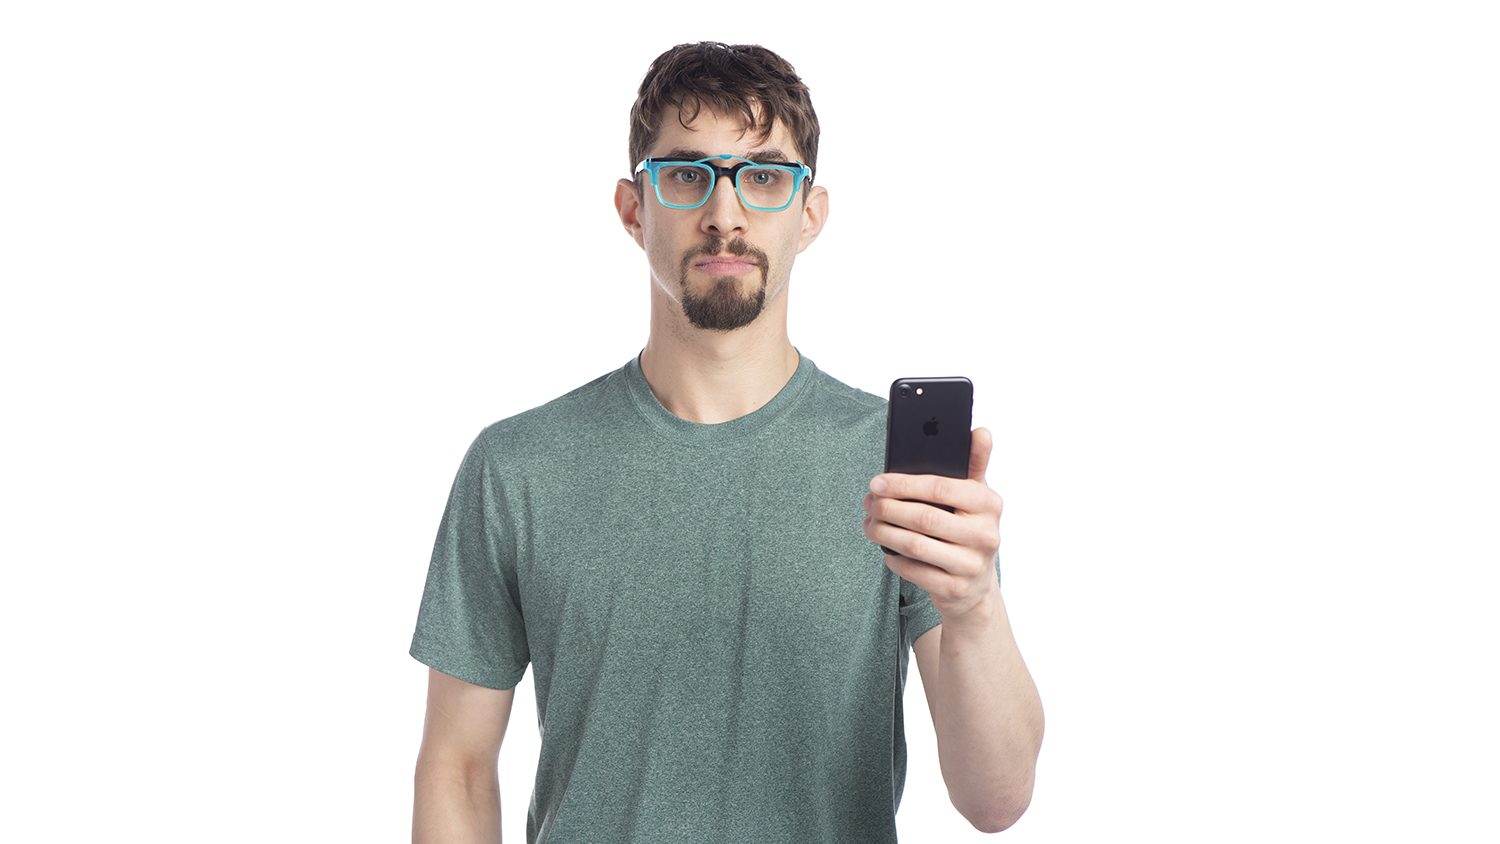 A person modeling the clip-on glasses design